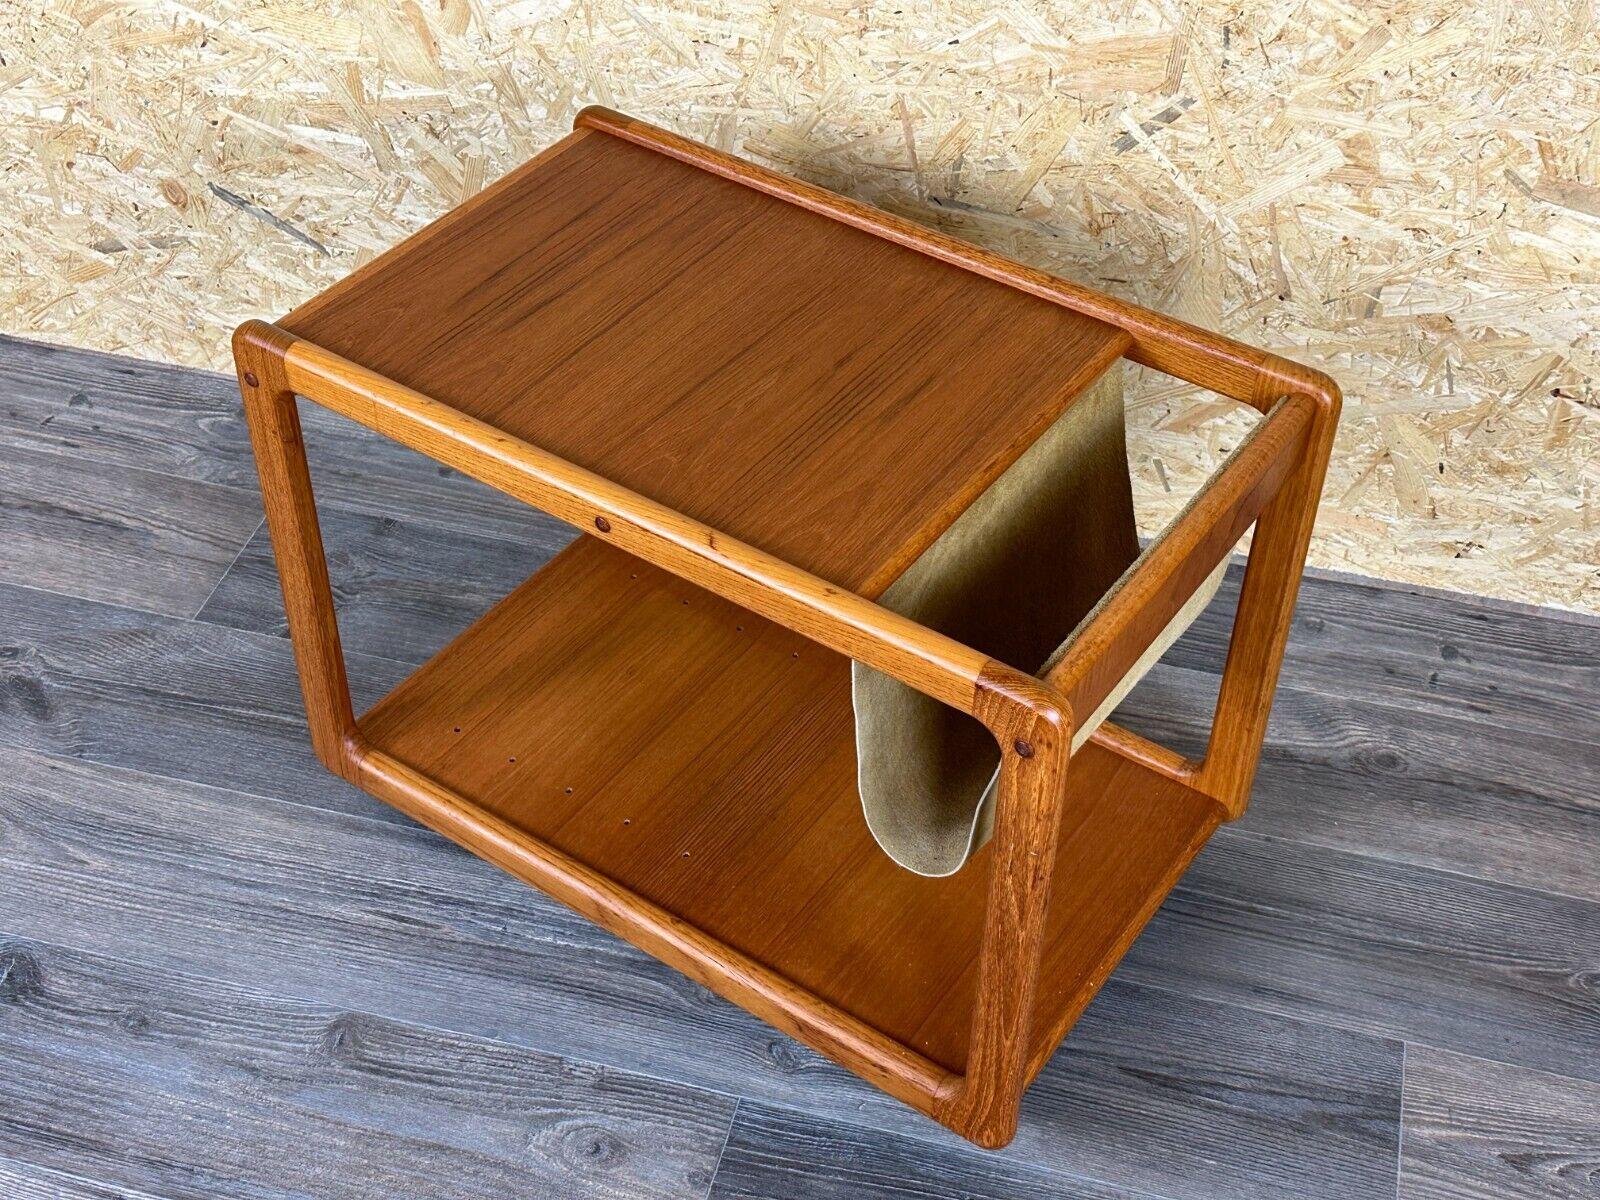 Late 20th Century 1960s-1970s Teak Table Side Table Newspaper Stand Danish Design, Denmark For Sale